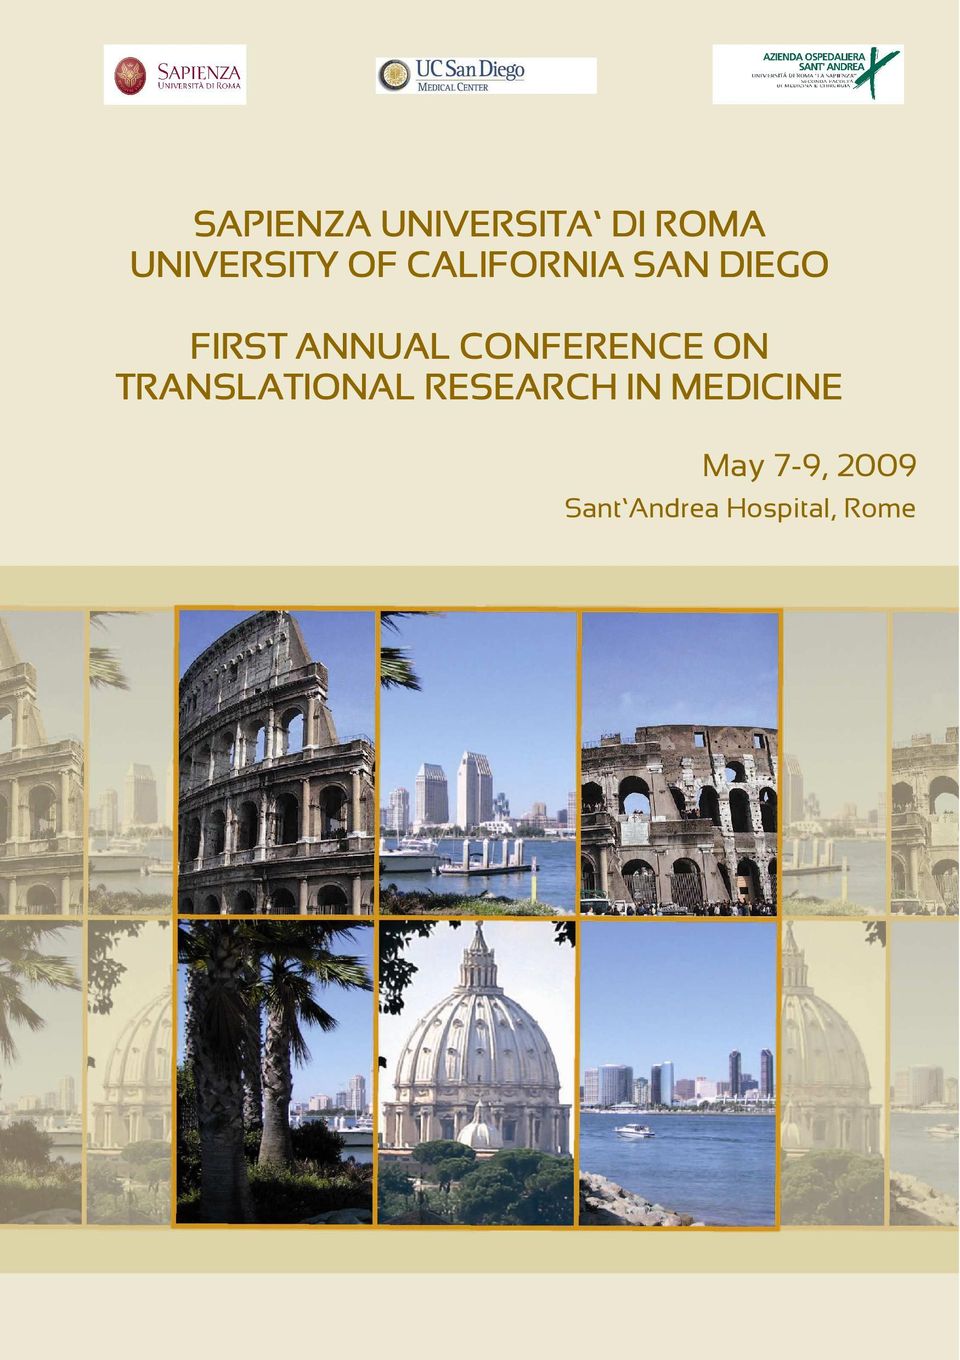 CONFERENCE ON TRANSLATIONAL RESEARCH IN